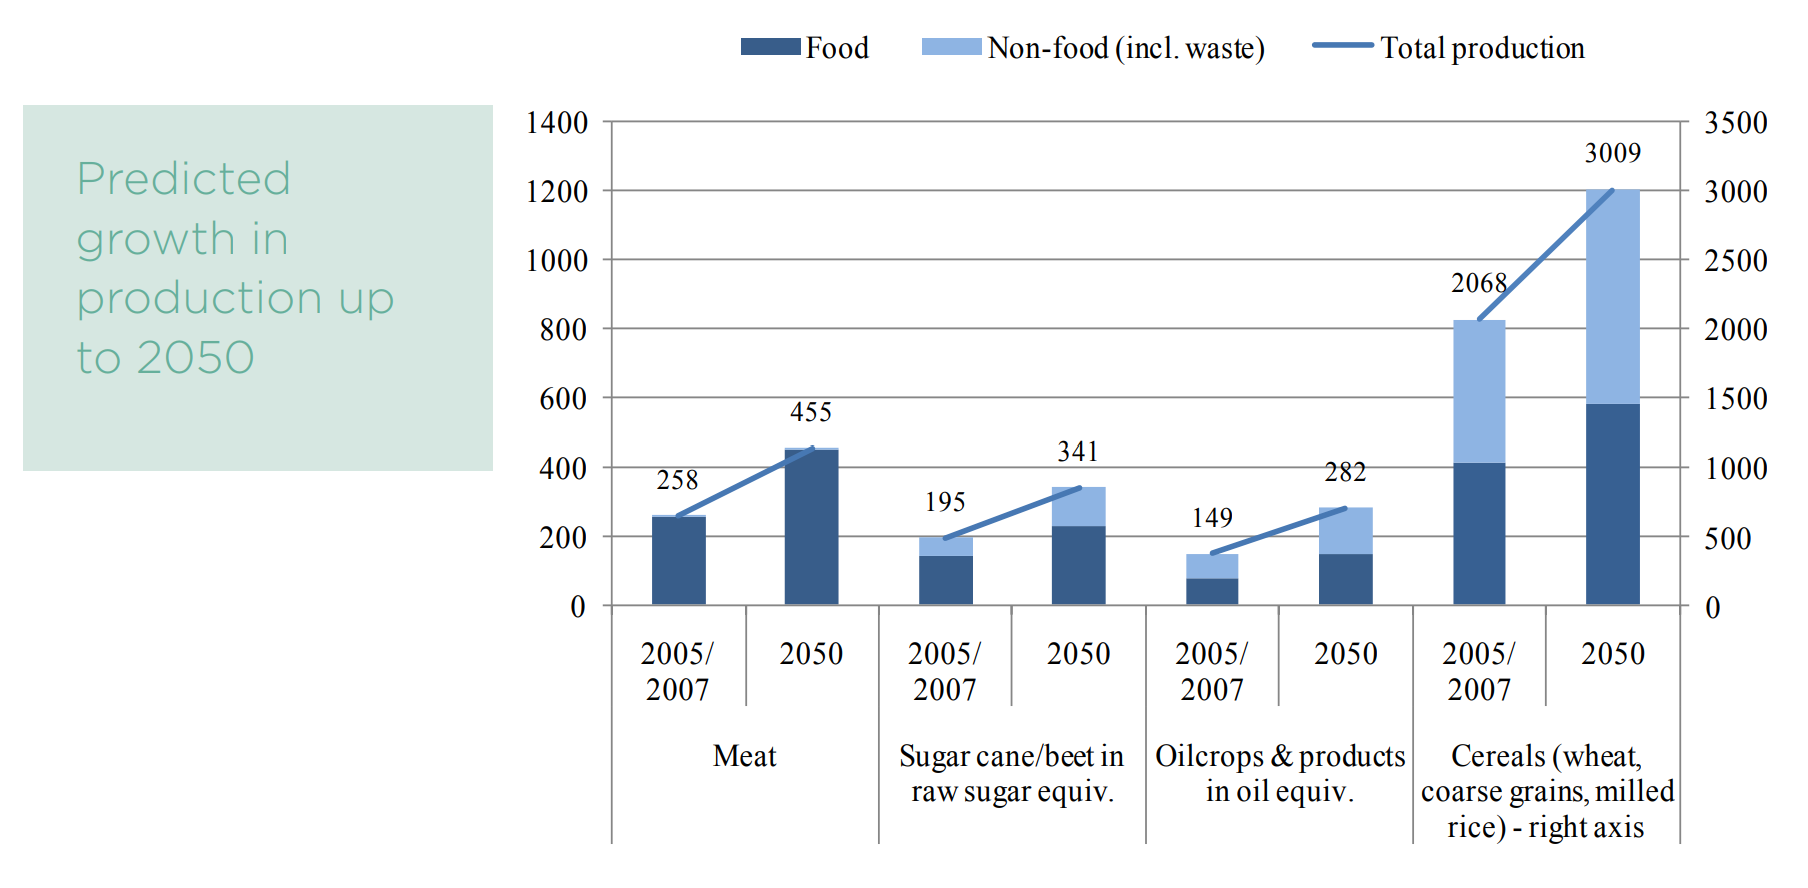 Figure 16: Projected growth in agricultural commodity production: 2005/2007 and 2050 projection